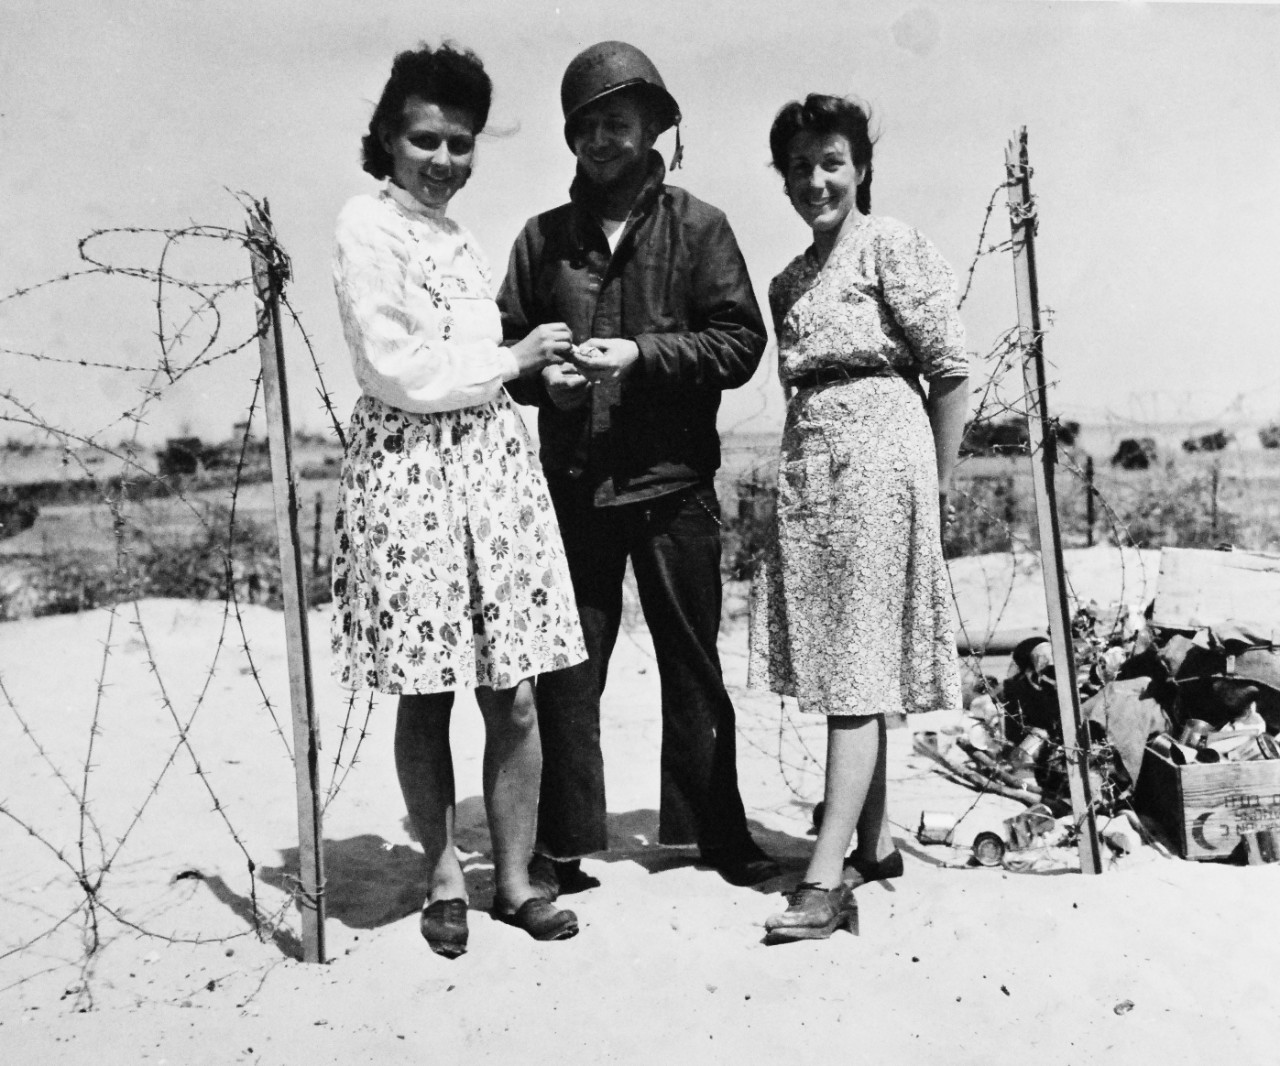 80-G-255949:   Normandy Invasion, Cherbourg, France, July 1944.    French girls accept cigarettes from an American sailor on beach-head in France.  These girls were found aiding in operations of radio receiving and transmitting. Photographed by CPU-11, 15 June 1944.  Official U.S. Navy Photograph, now in the collections of the National Archives.   (2014/11/05). 